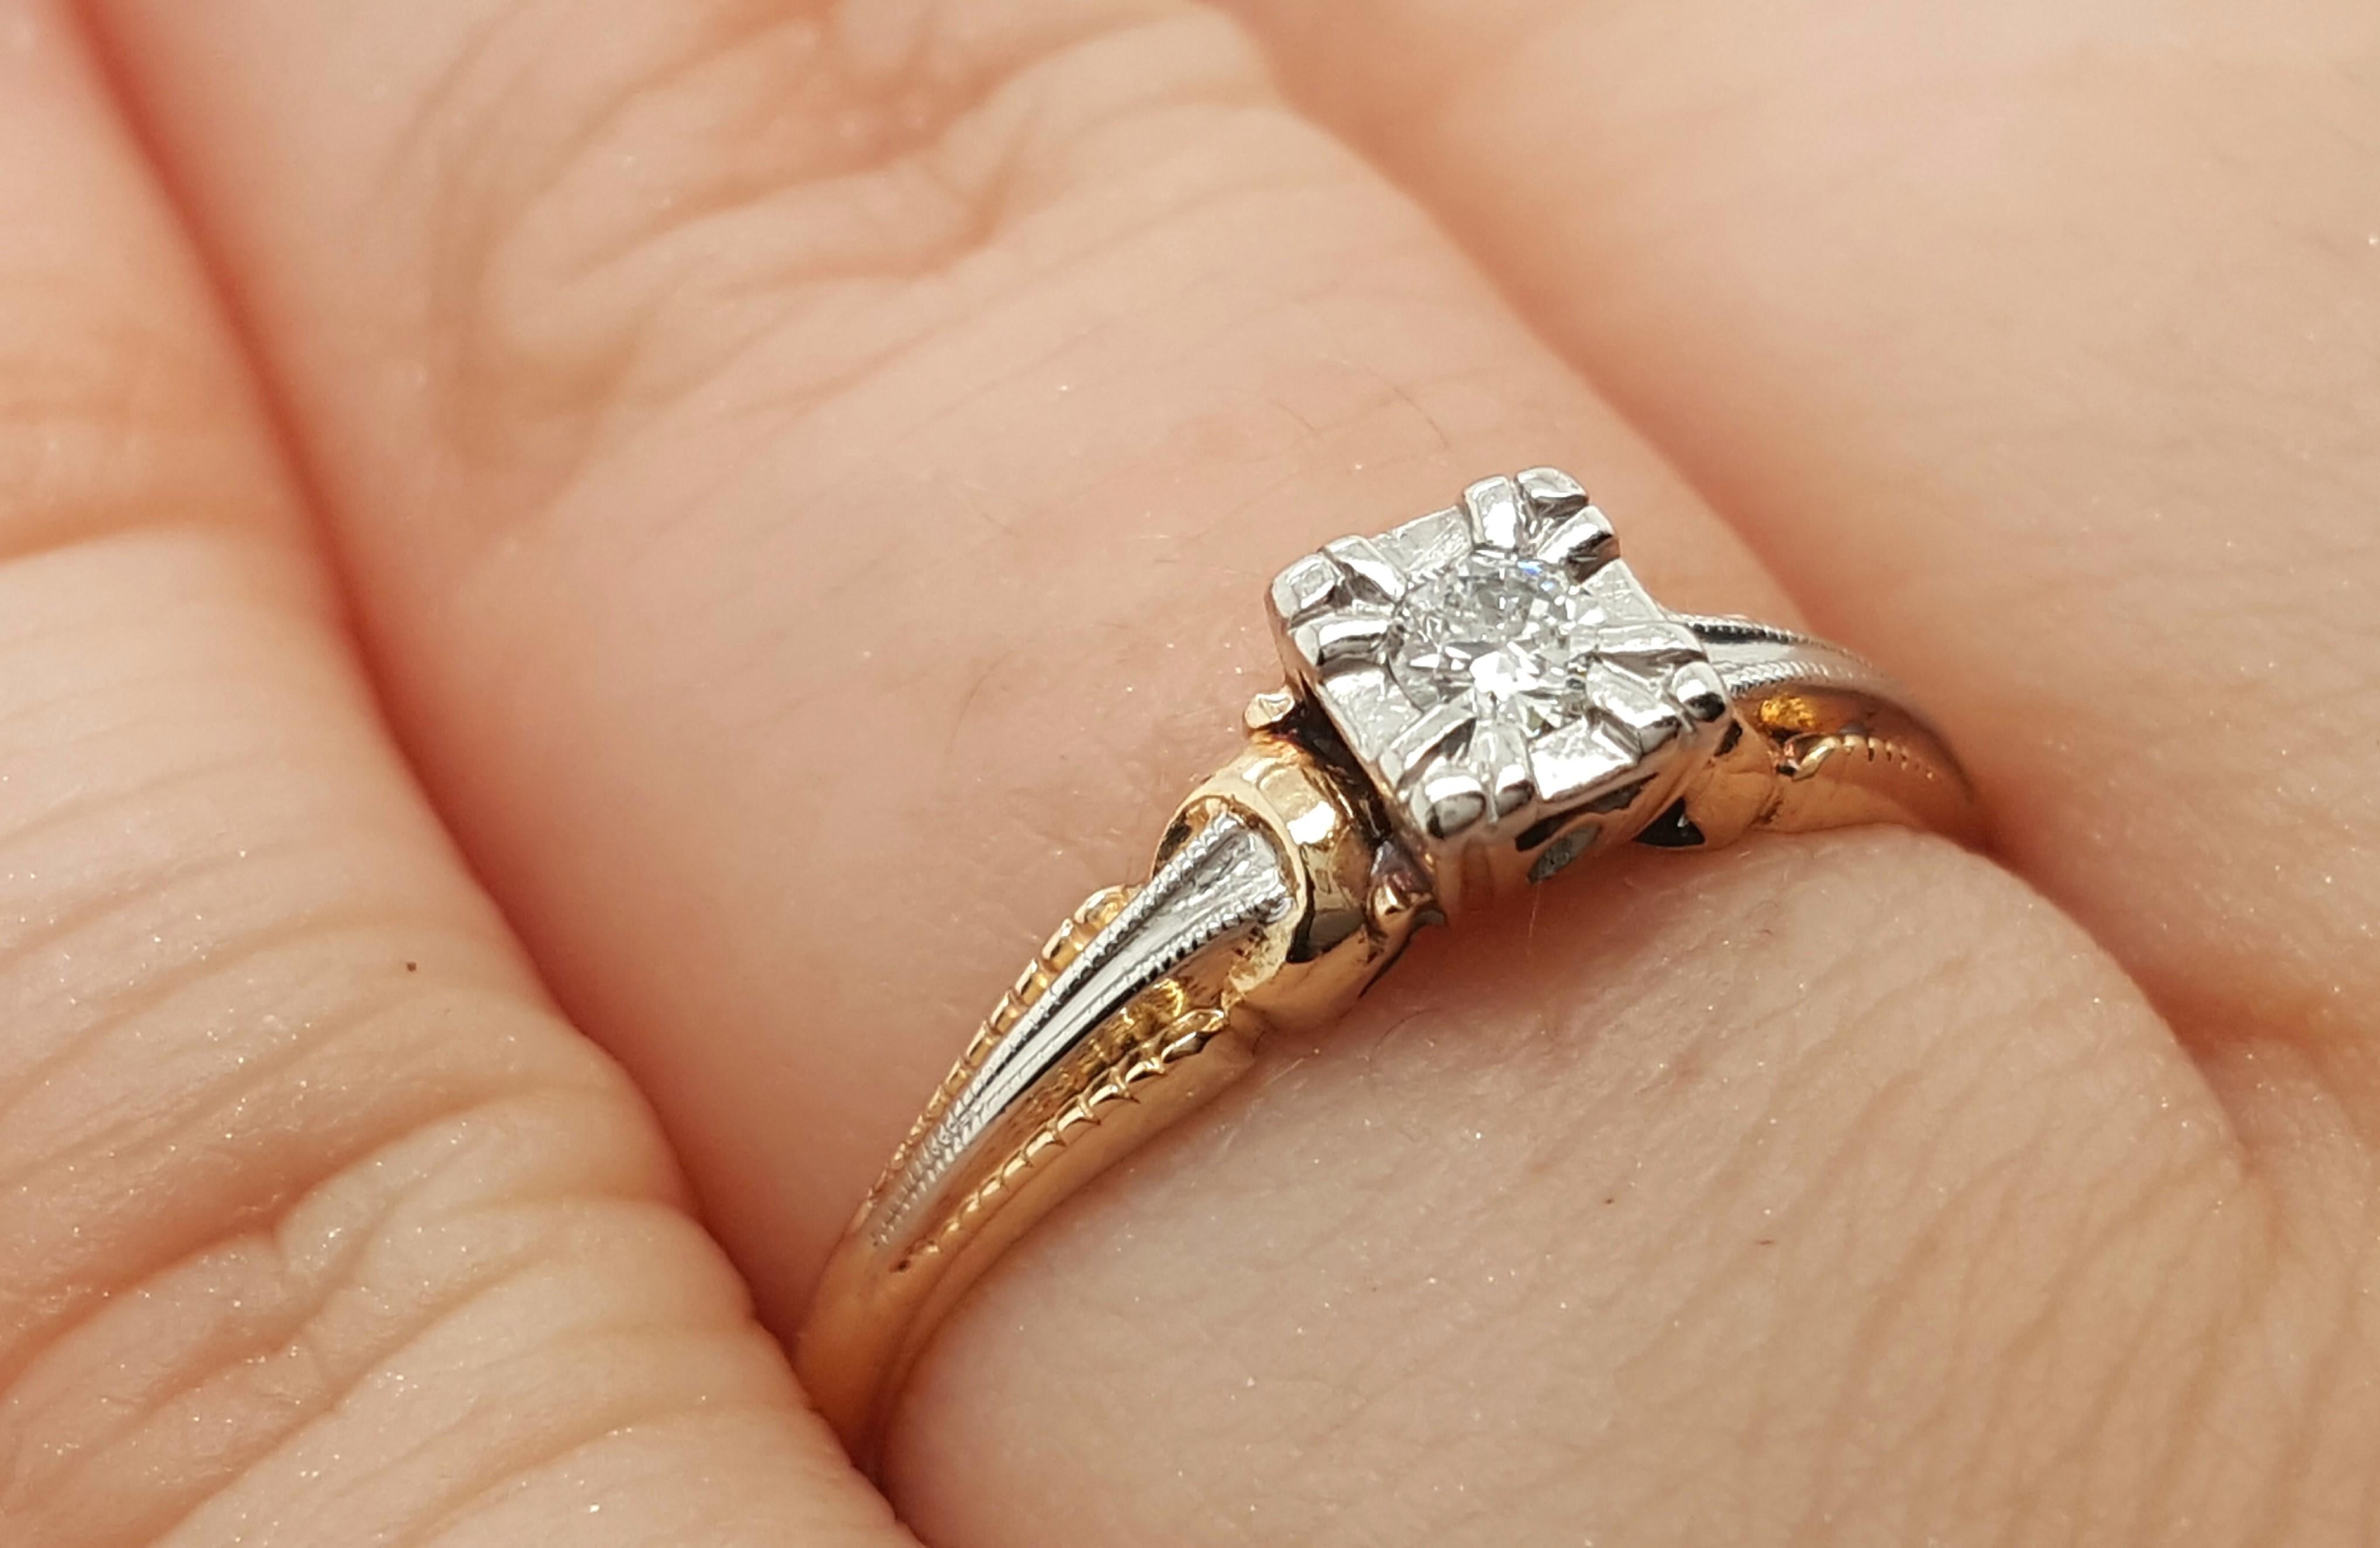 This cute Art Deco solitaire is a fine example of a filigree solitaire engagement ring crafted in 14 karat yellow and white gold. The antique Old European cut diamond is held in a hexagonal head, leading down to an intricate filigree design that